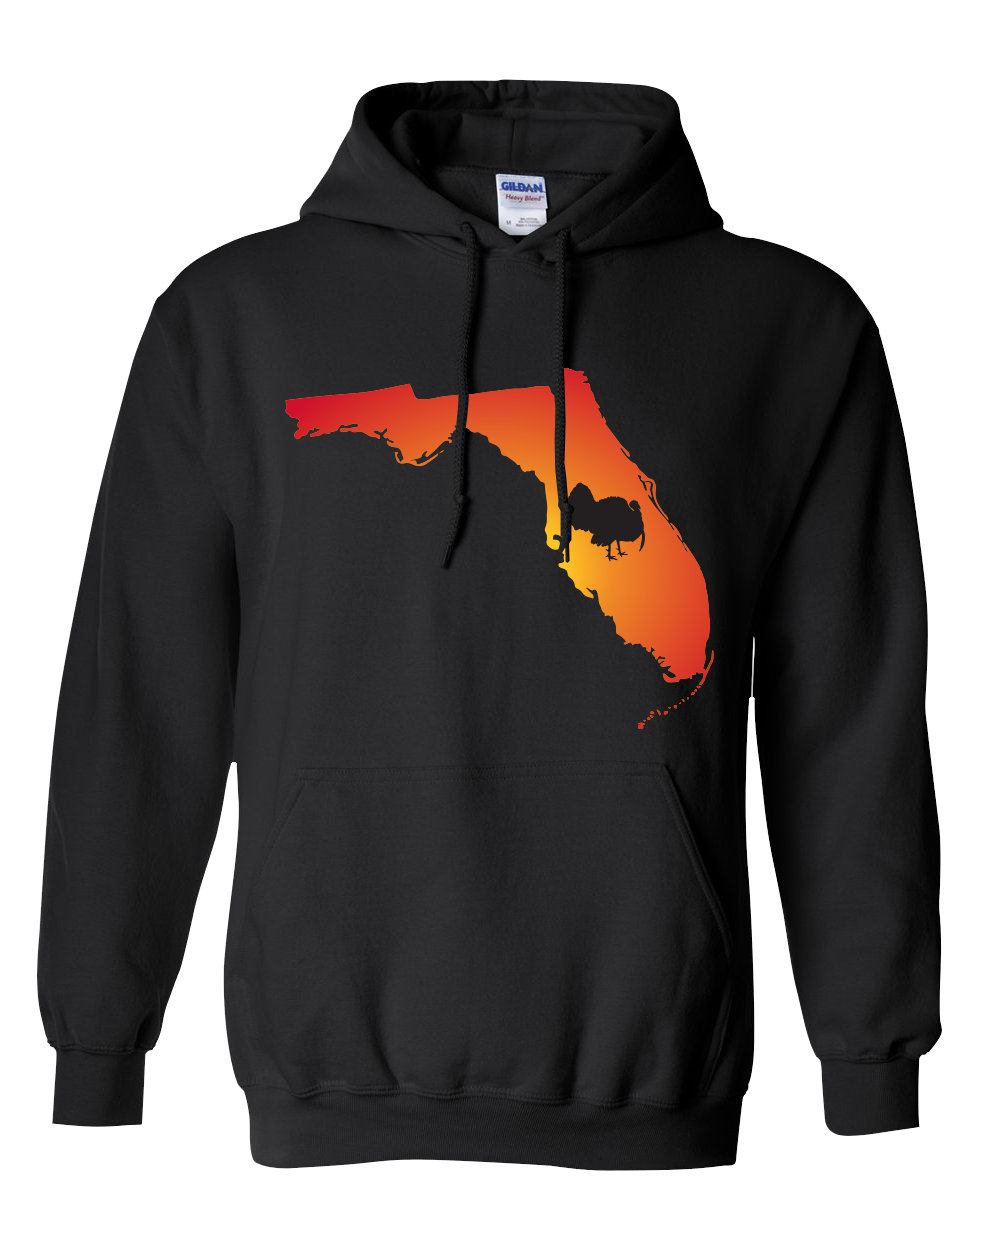 Pullover Hooded Sweatshirt Florida Black Turkey Vibrant Design High Quality Tight Knit Ring Spun Low Maintenance Cotton Printed With The Newest Available Color Transfer Technology